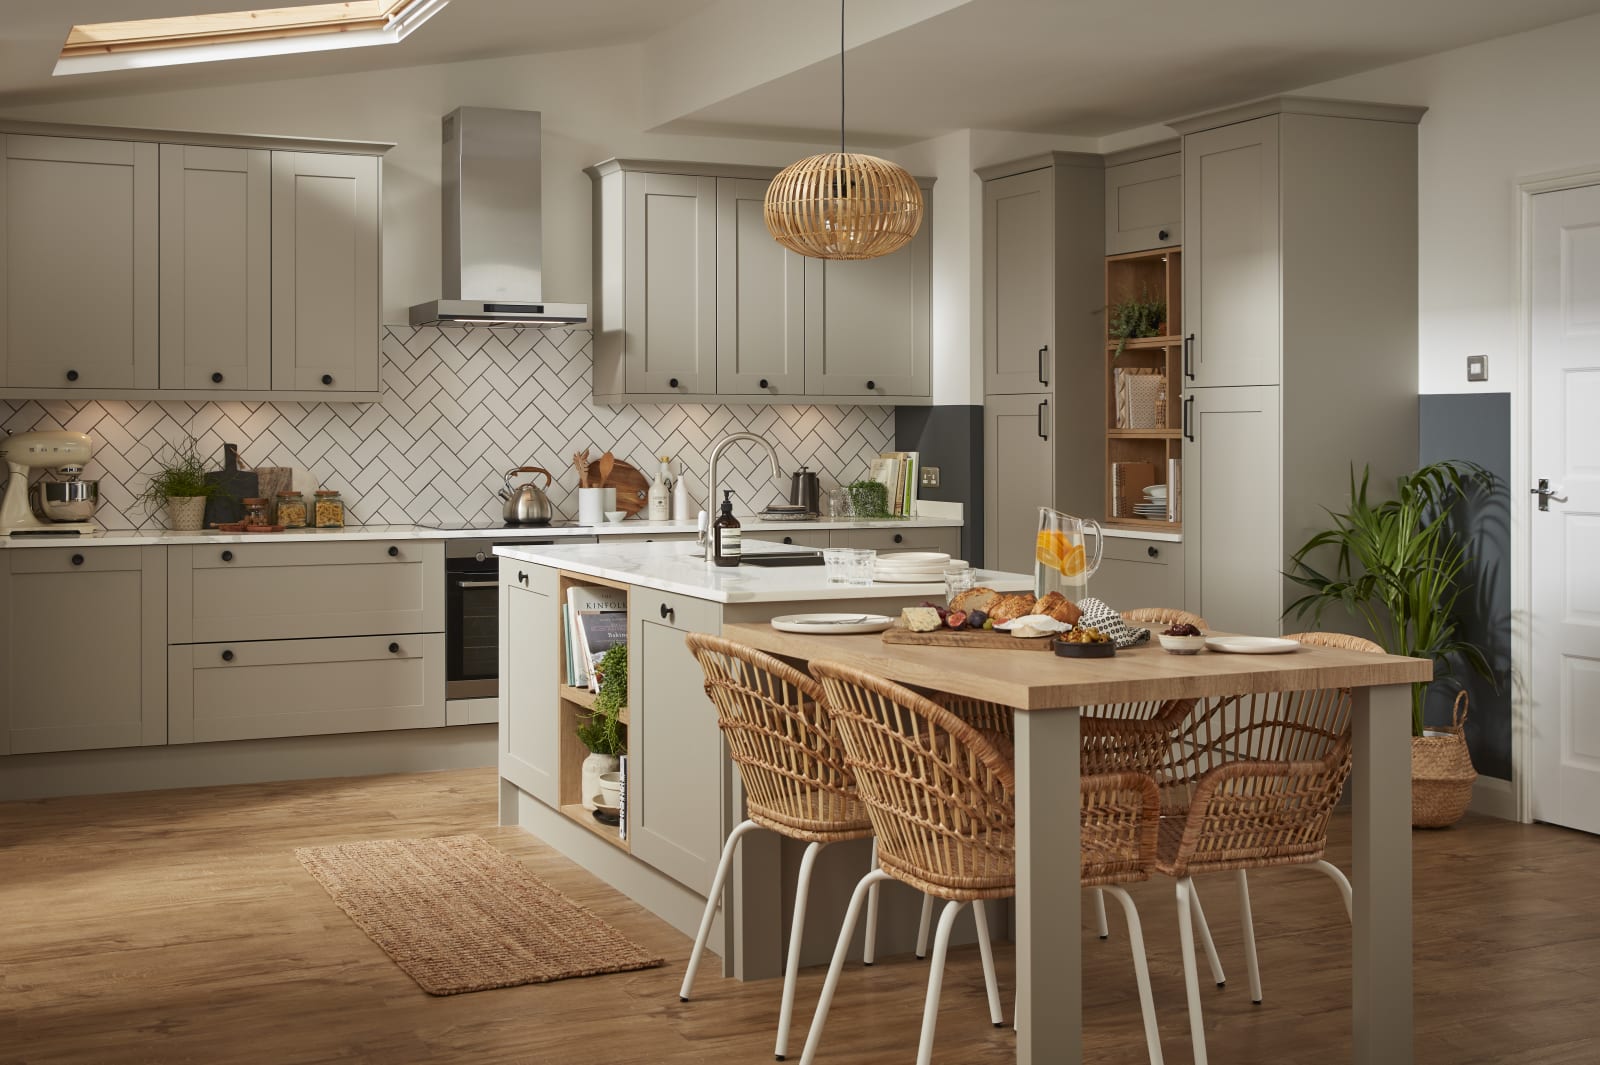 Tatton Kitchen by Magnet. A beautiful easy to use kitchen with traditional features with stylish modern touches.